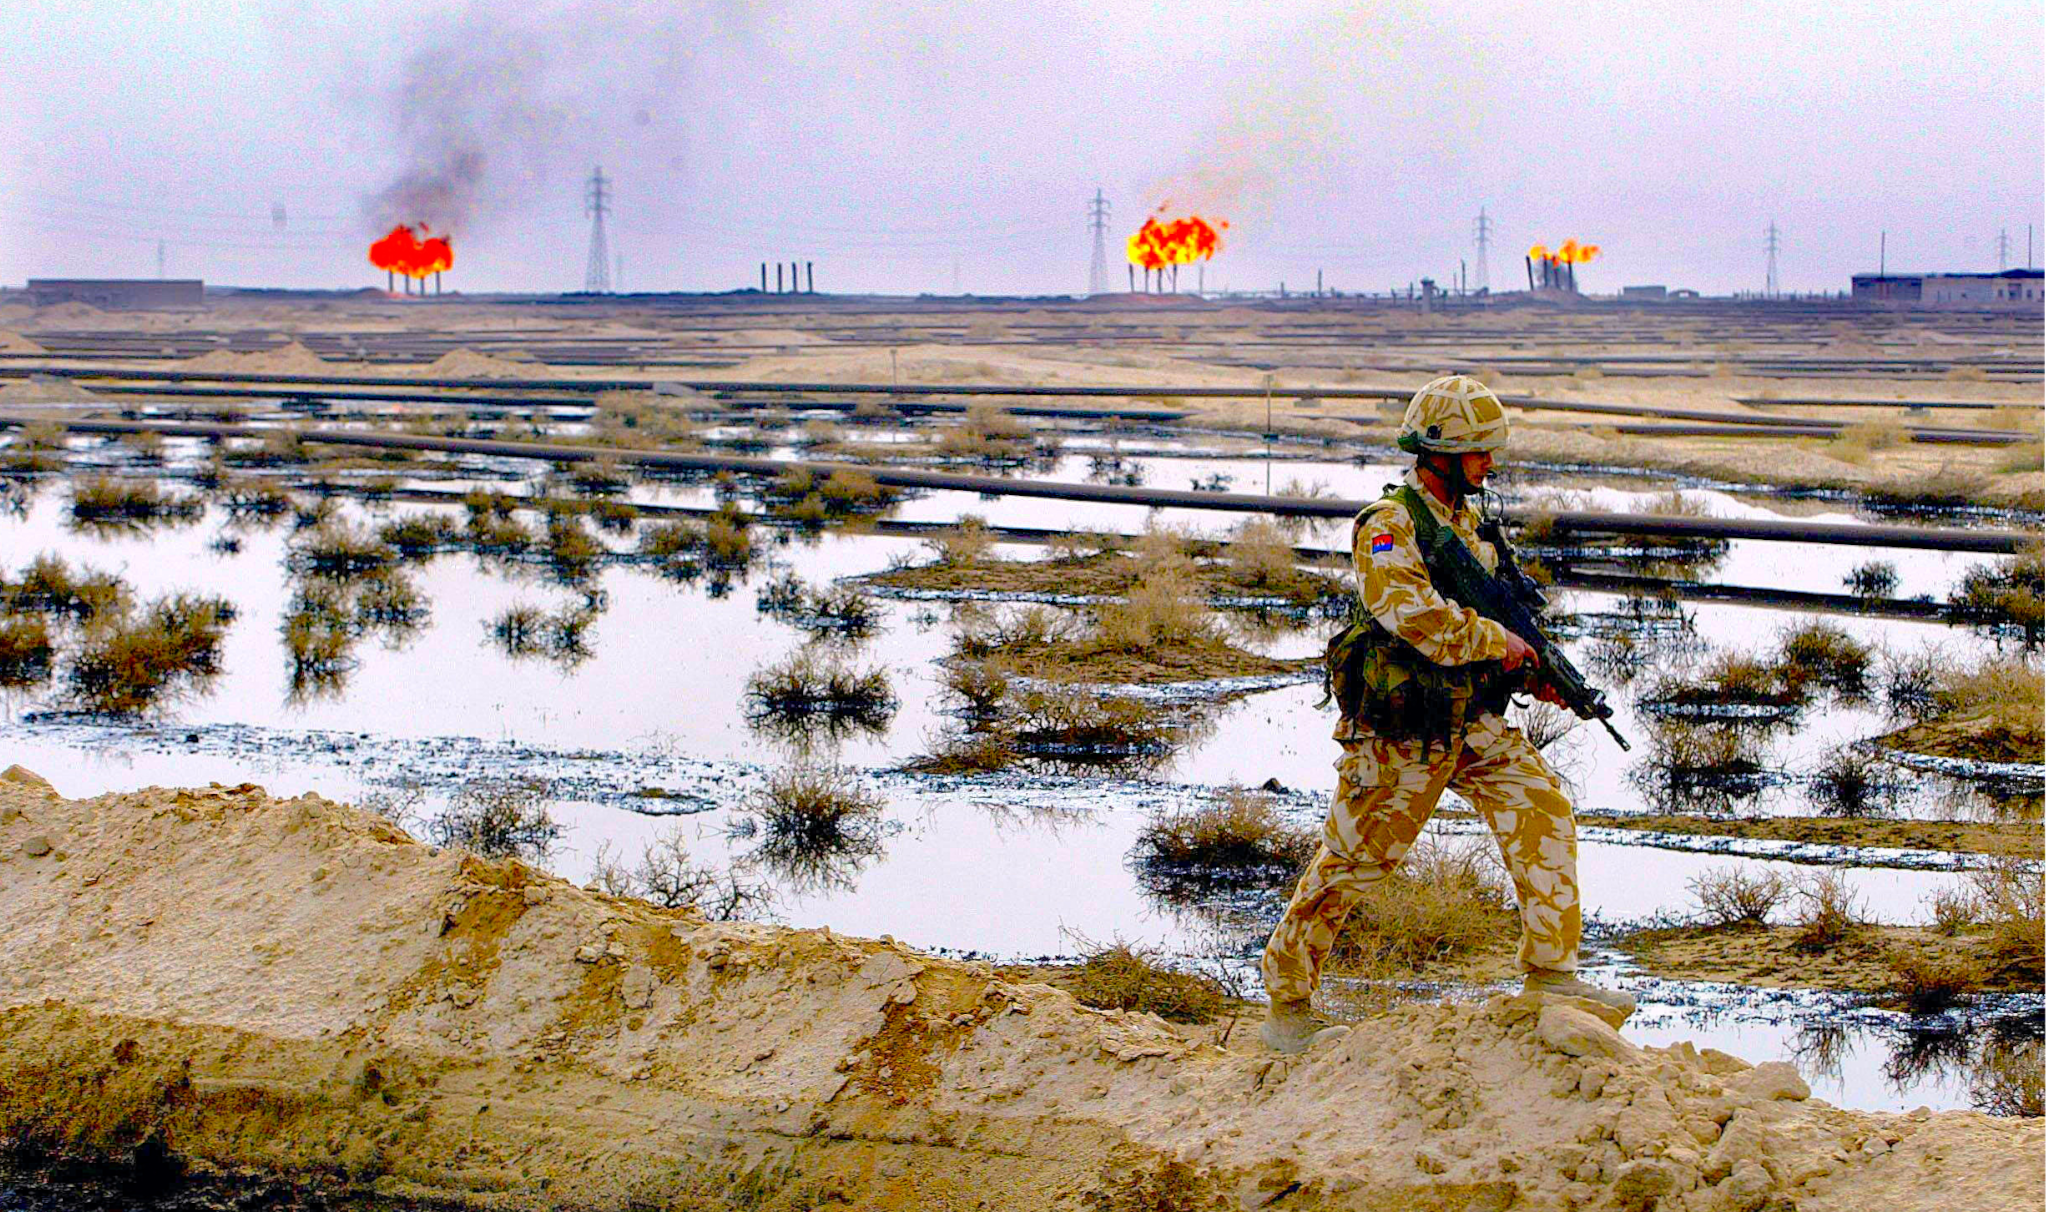 BP extracted Iraqi oil worth £15bn after British invasion